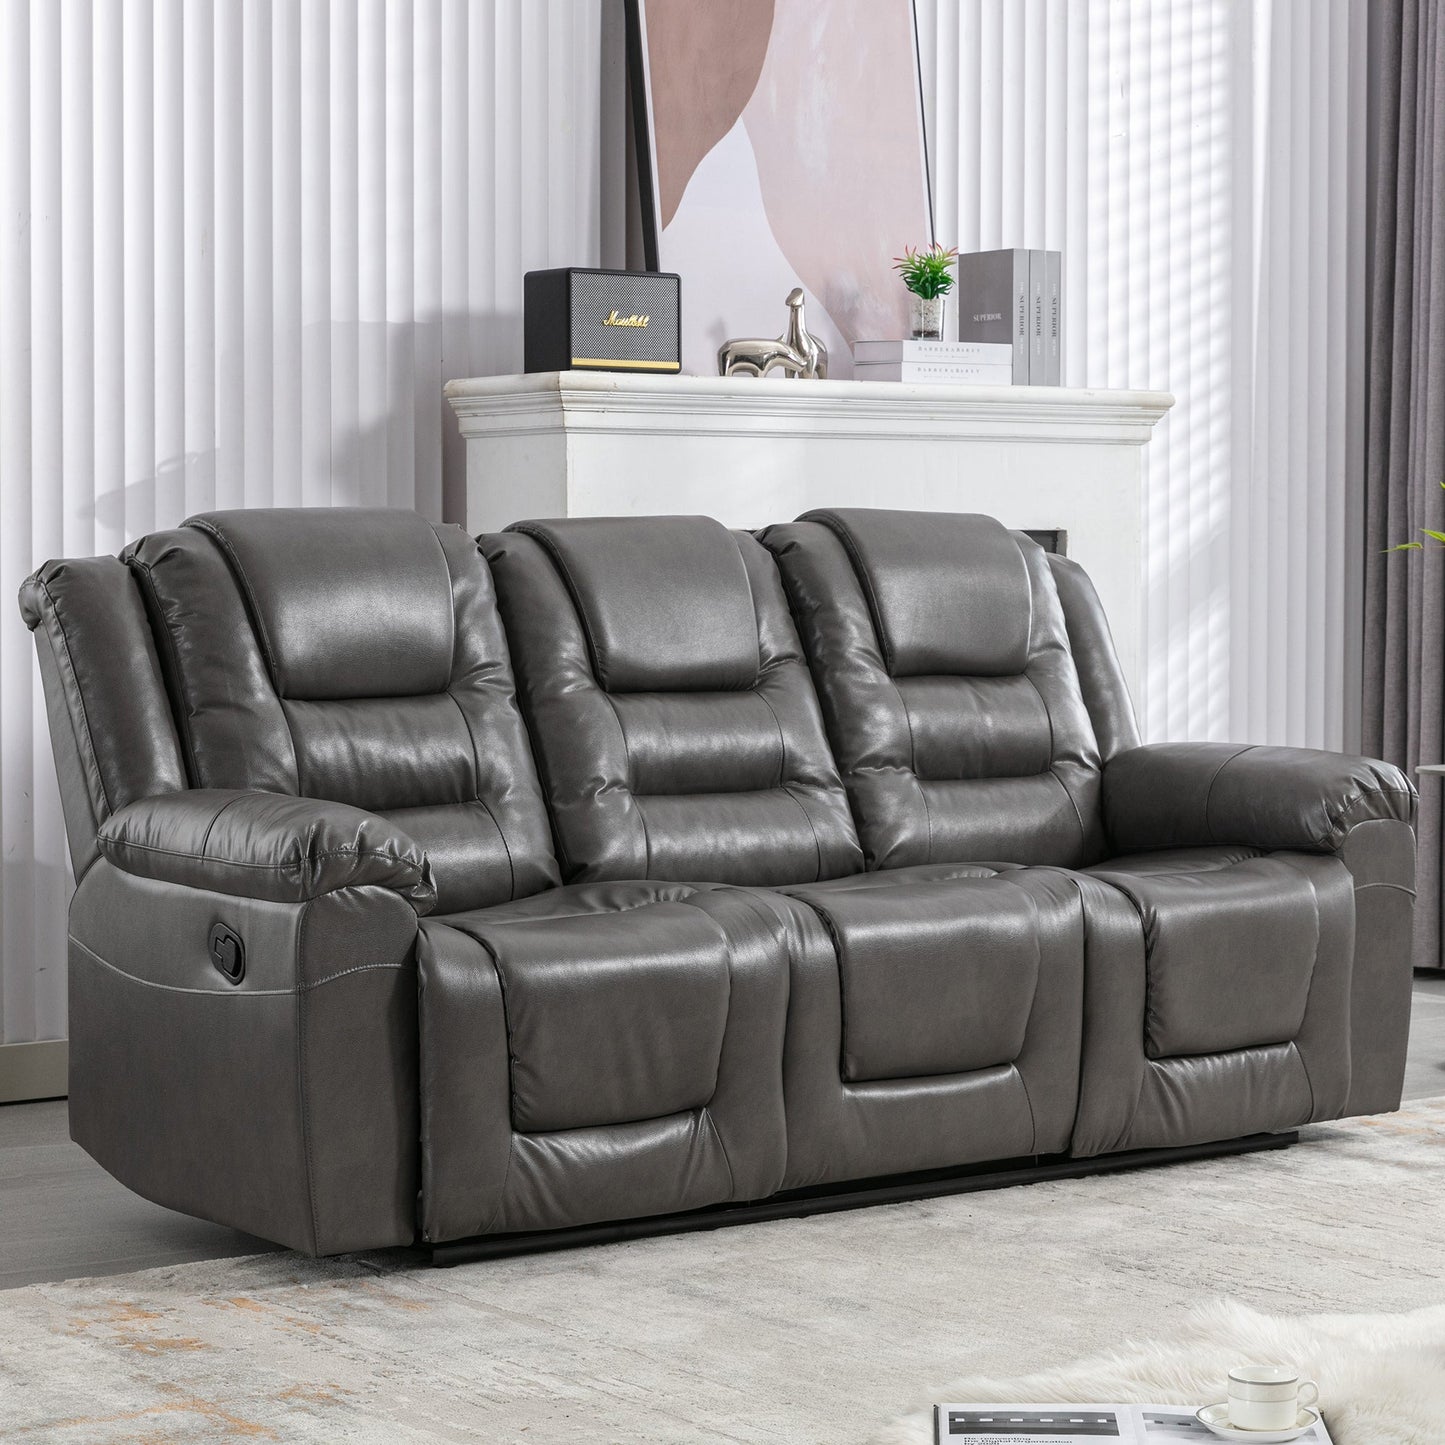 3 Seater Home Theater Recliner Manual Recliner Chair with Two Built-in